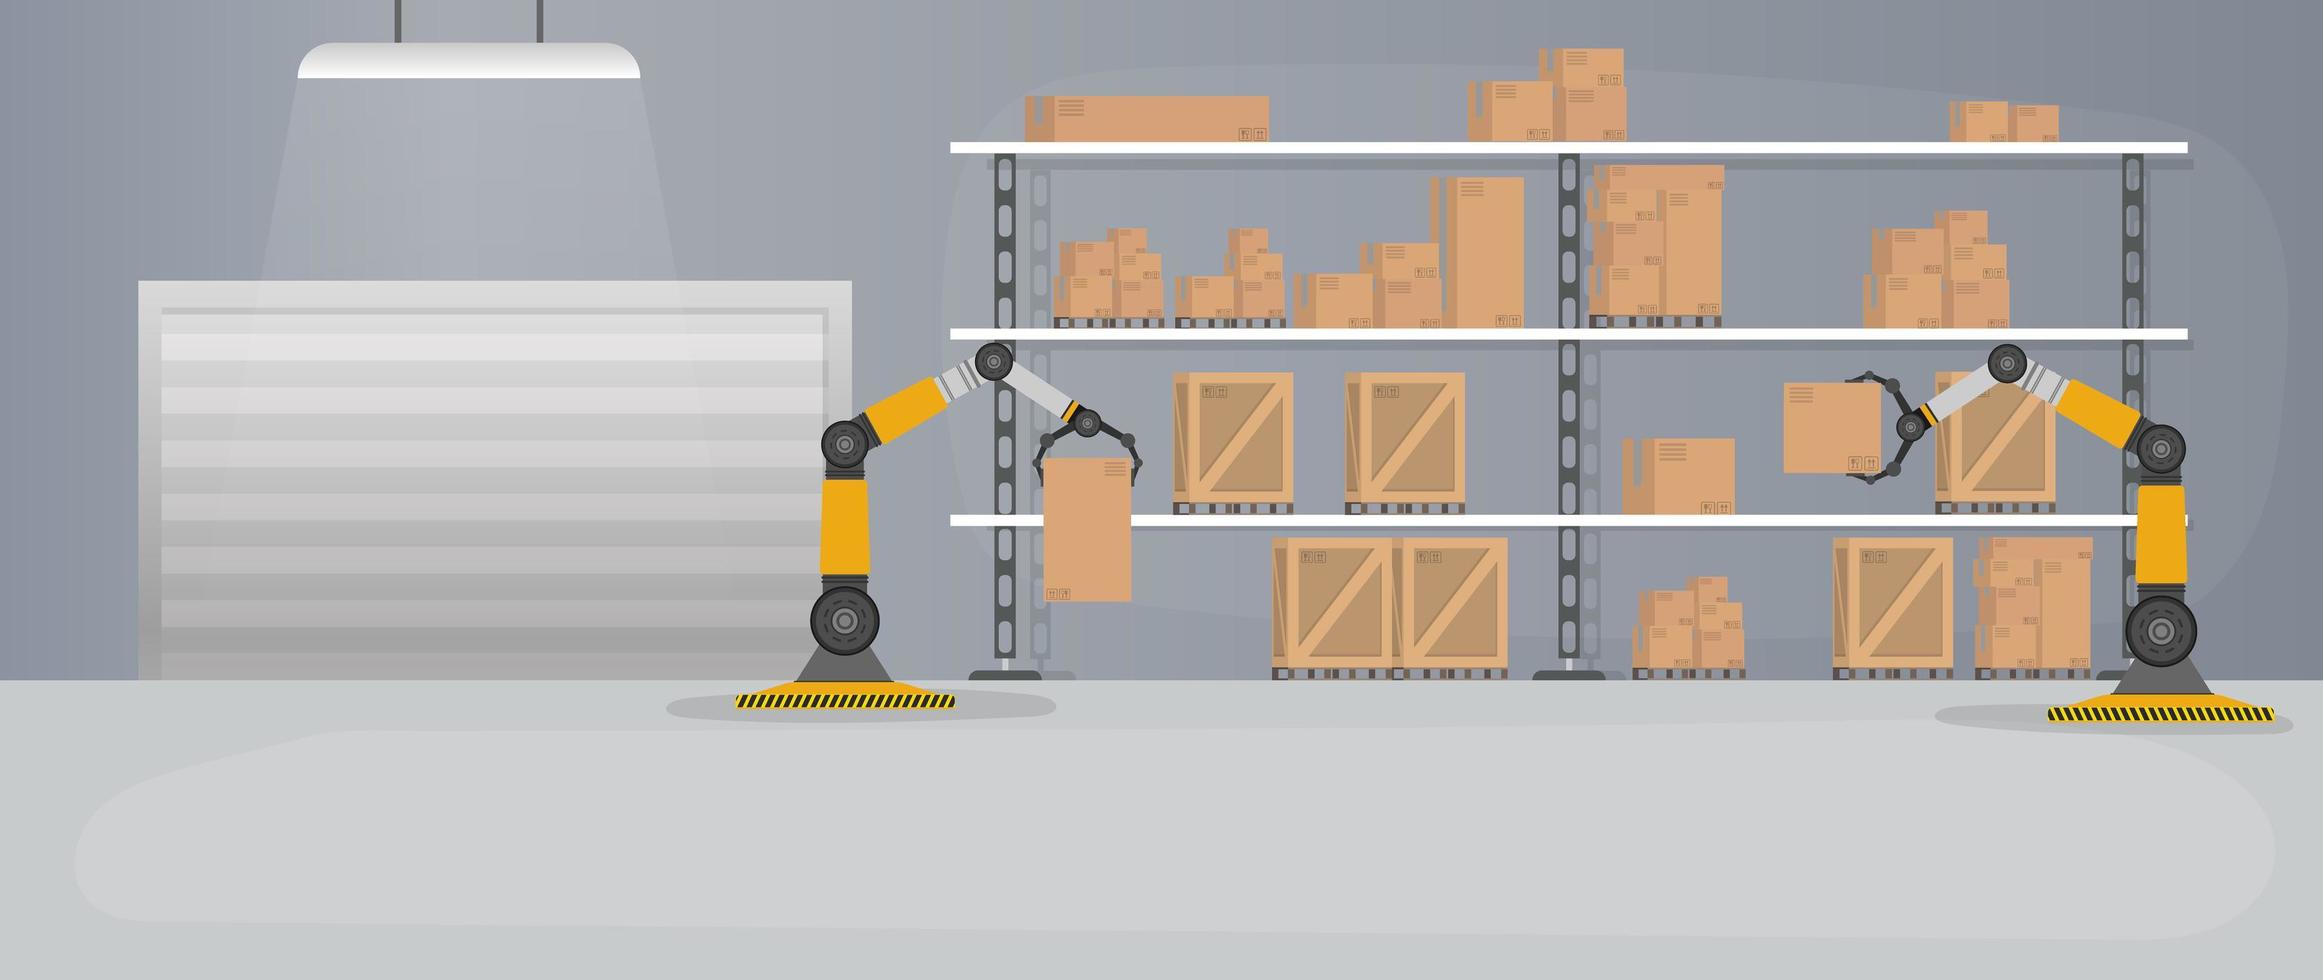 Production warehouse with boxes and pallets. Robotic arm works in a warehouse. Robot arm lifts boxes. vector